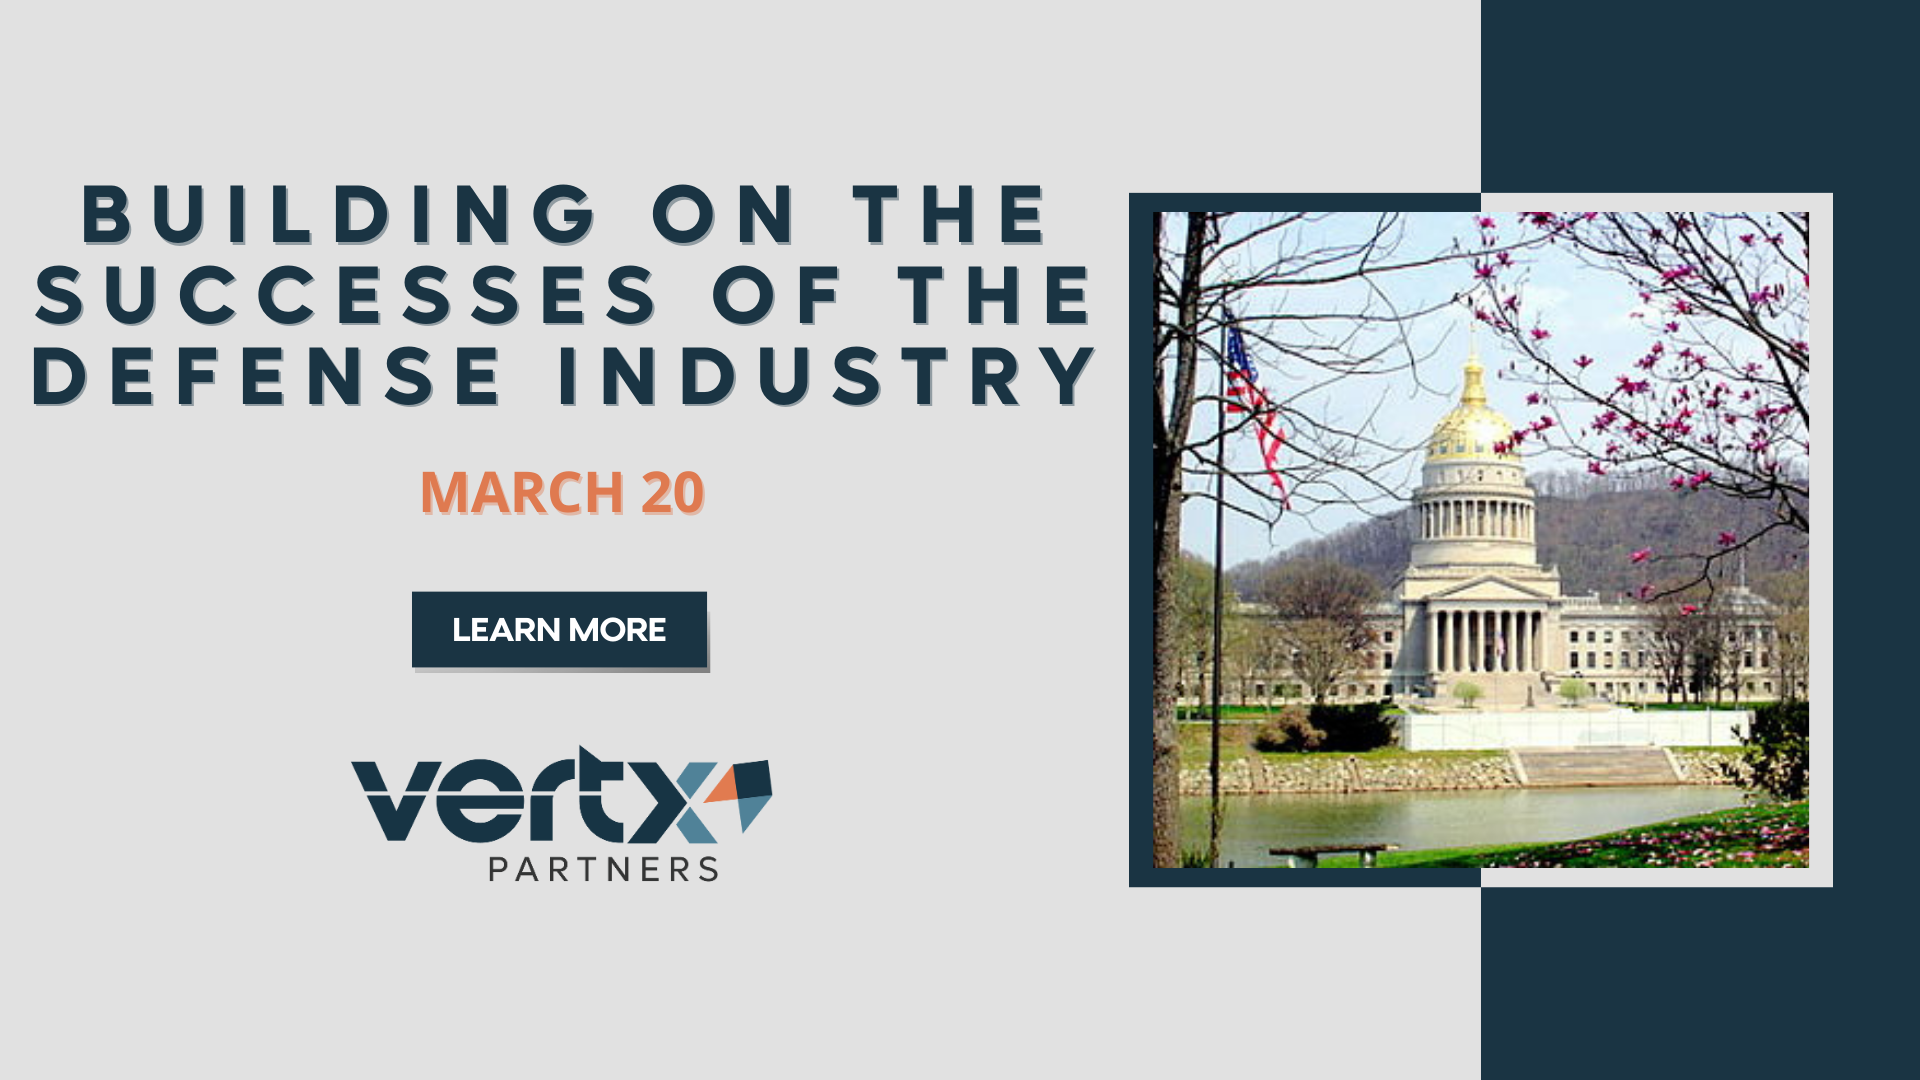 This graphic has the title "Building on the Successes of the Defense Industry: An Update" with the date march 20th under it and a photo of the west virginia capital next to the title and the date